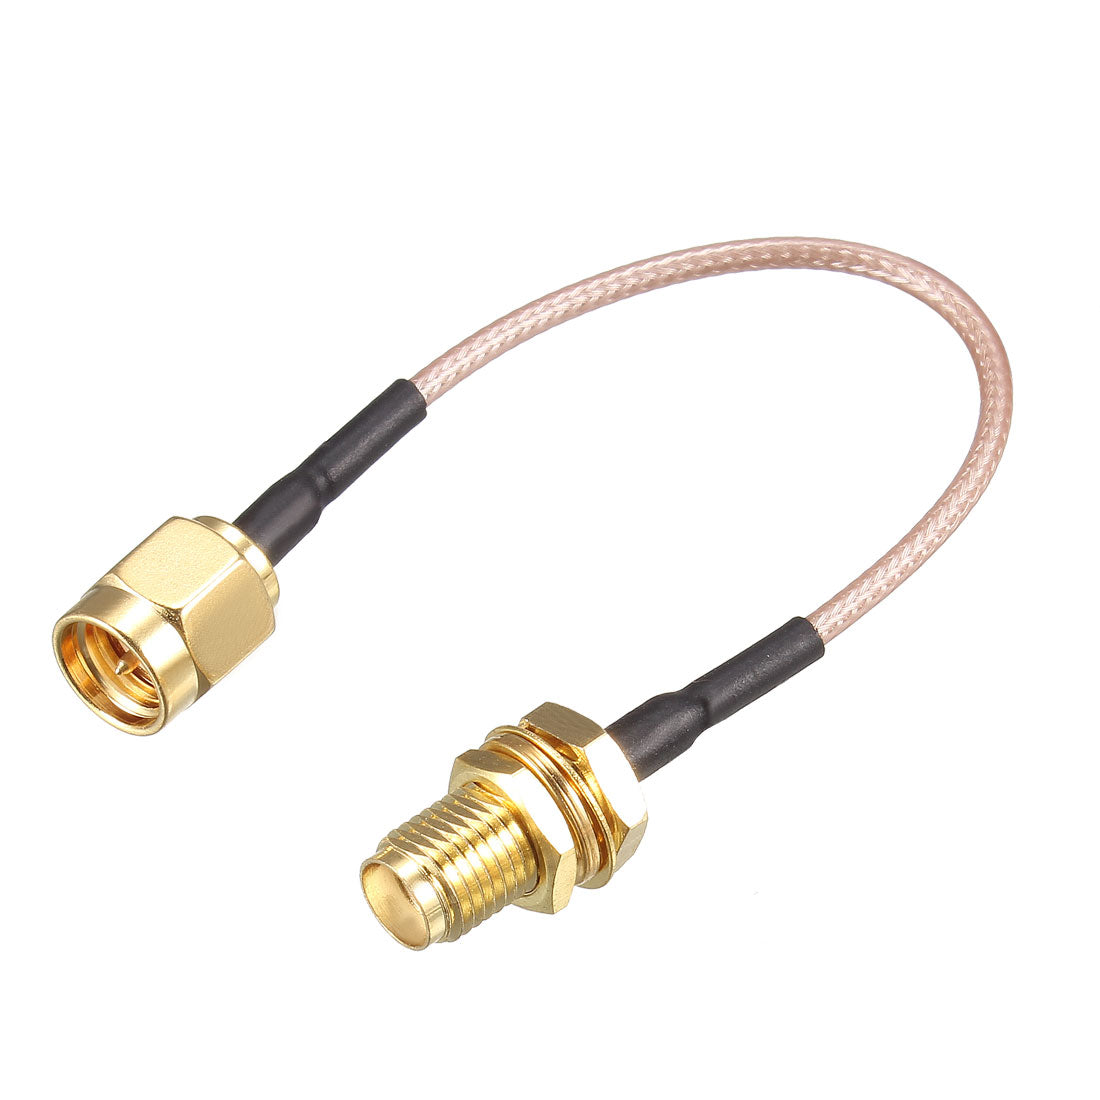 Uxcell Uxcell Low Loss RF Coaxial Cable Connection Coax Wire RG-178 SMA Female to SMA Male 10cm 5pcs